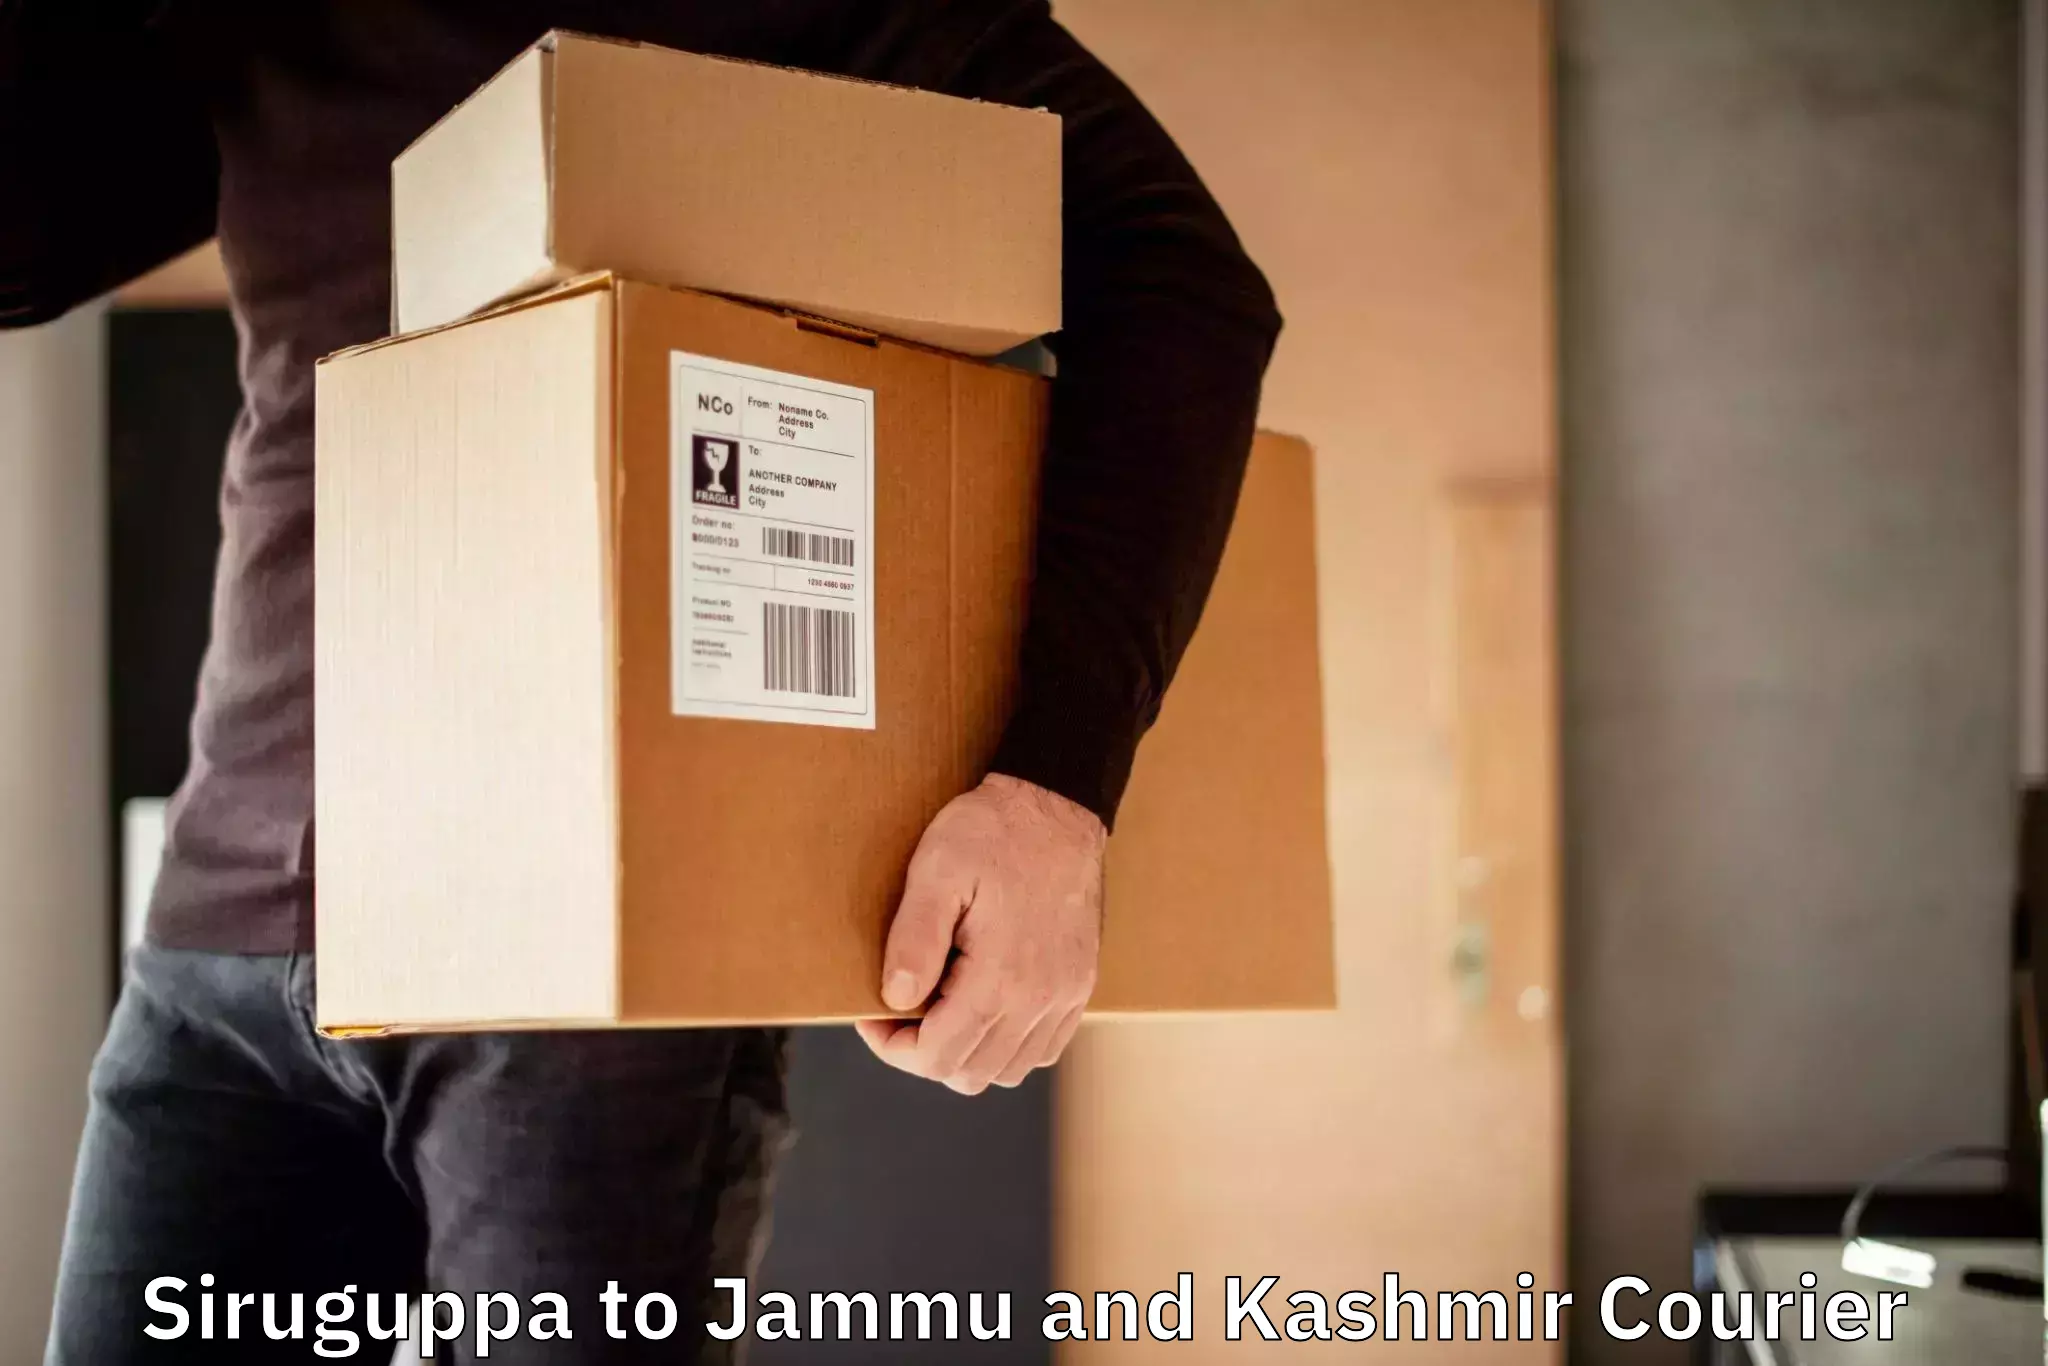 Global courier networks Siruguppa to Budgam